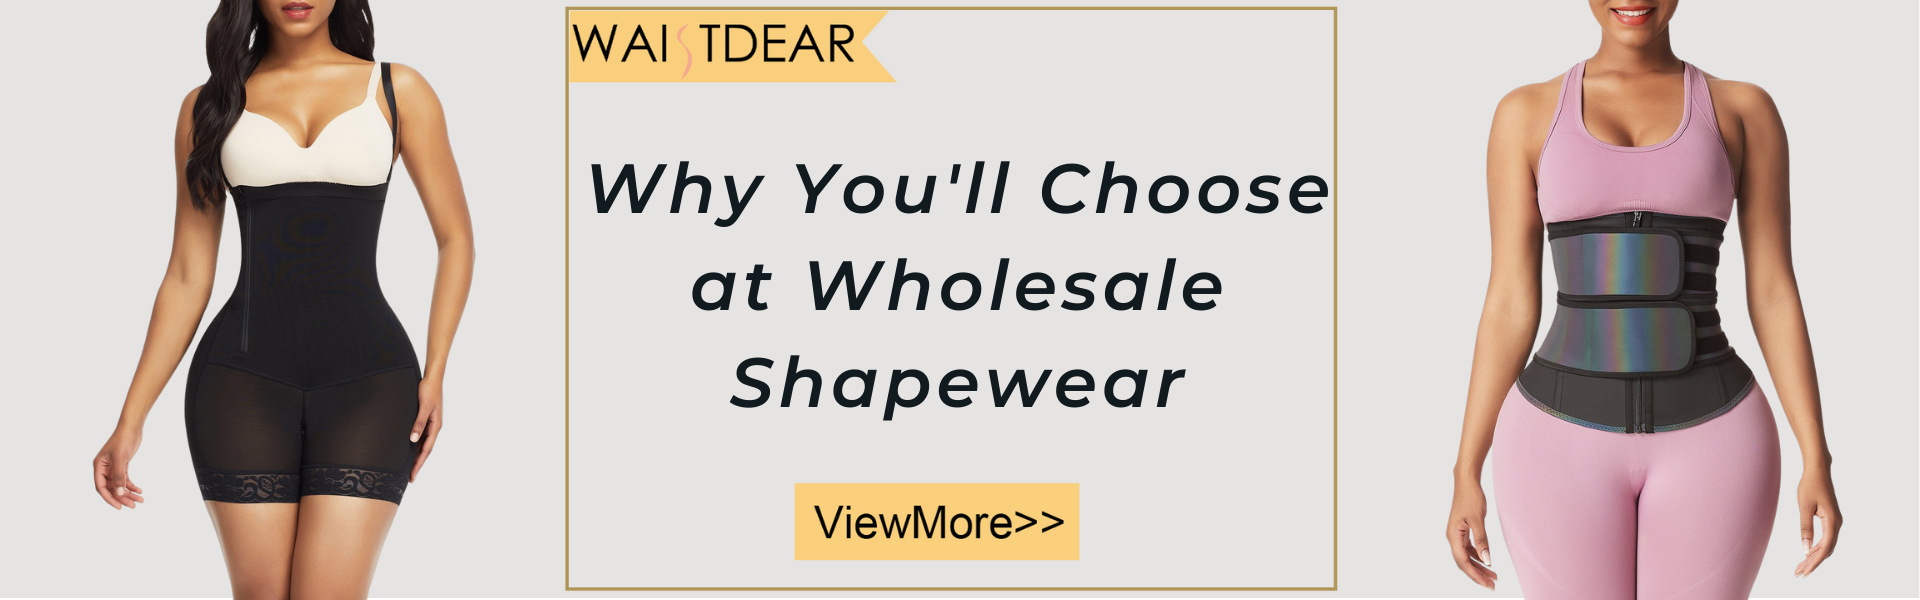 Why You'll Choose at Wholesale Shapewears